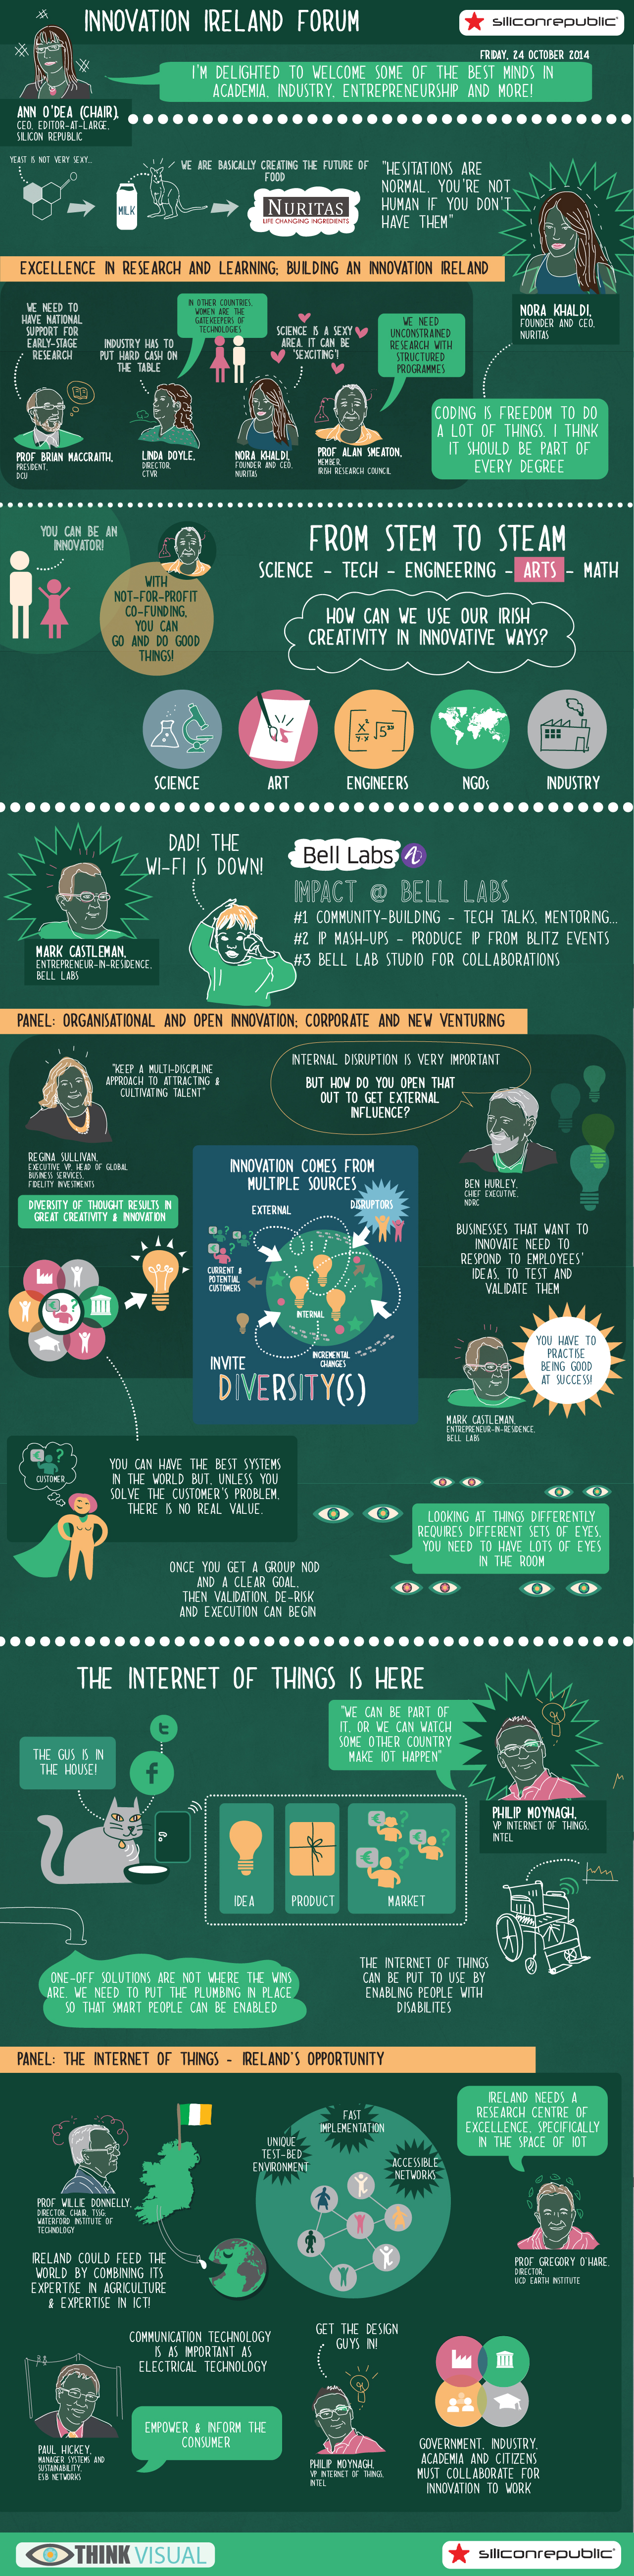 Innovation Ireland Forum 2014 infographic by Think Visual